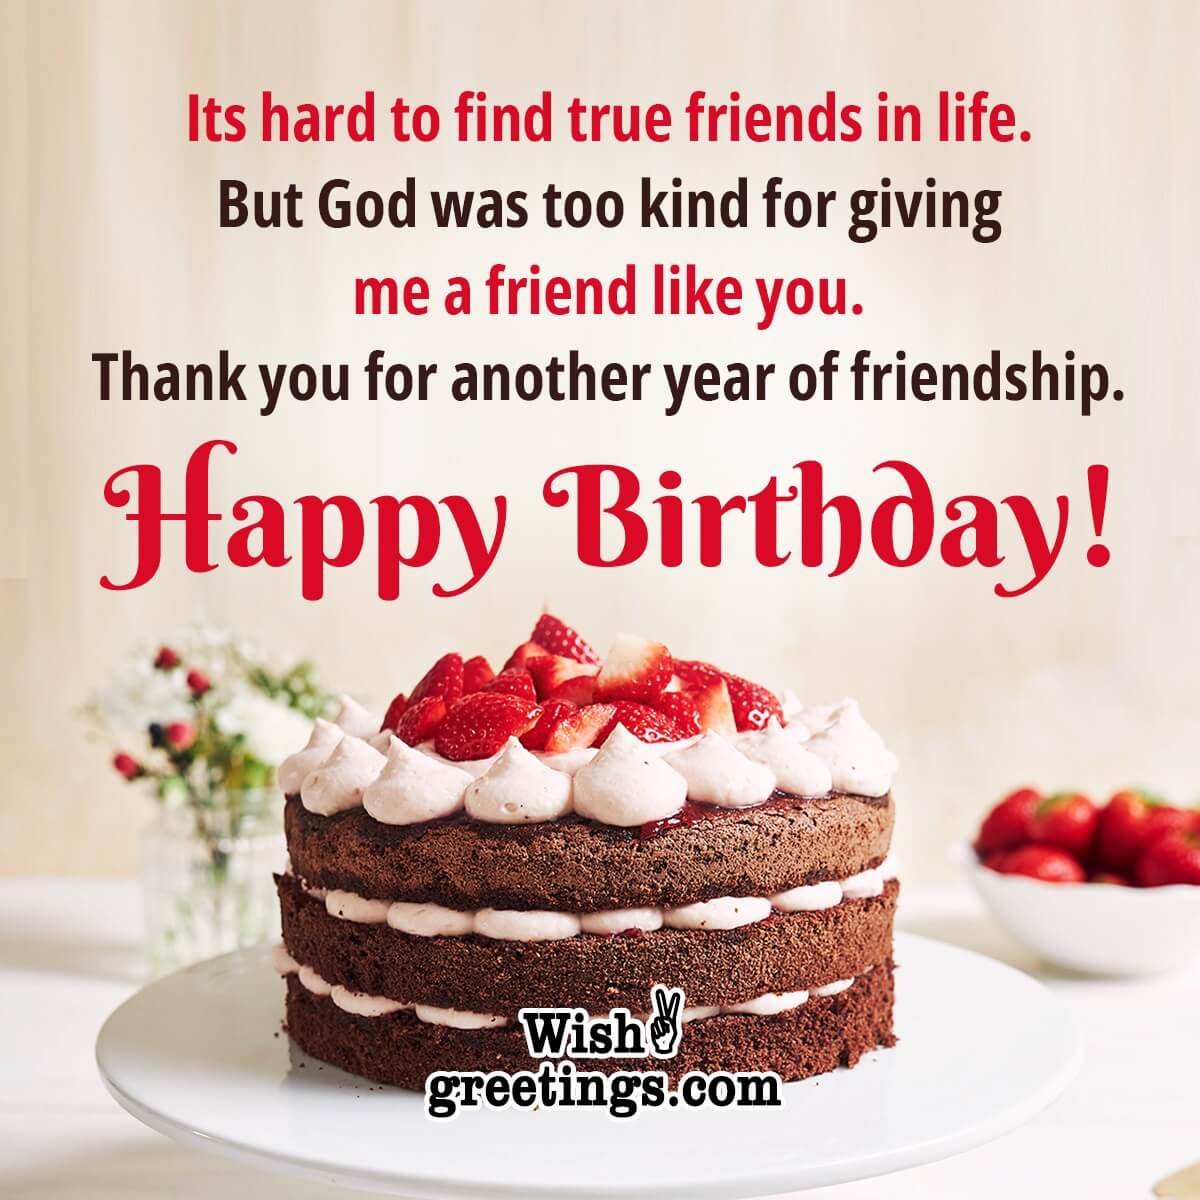 Collection of Over 999 Top Happy Birthday Friend Images - Stunning Full ...